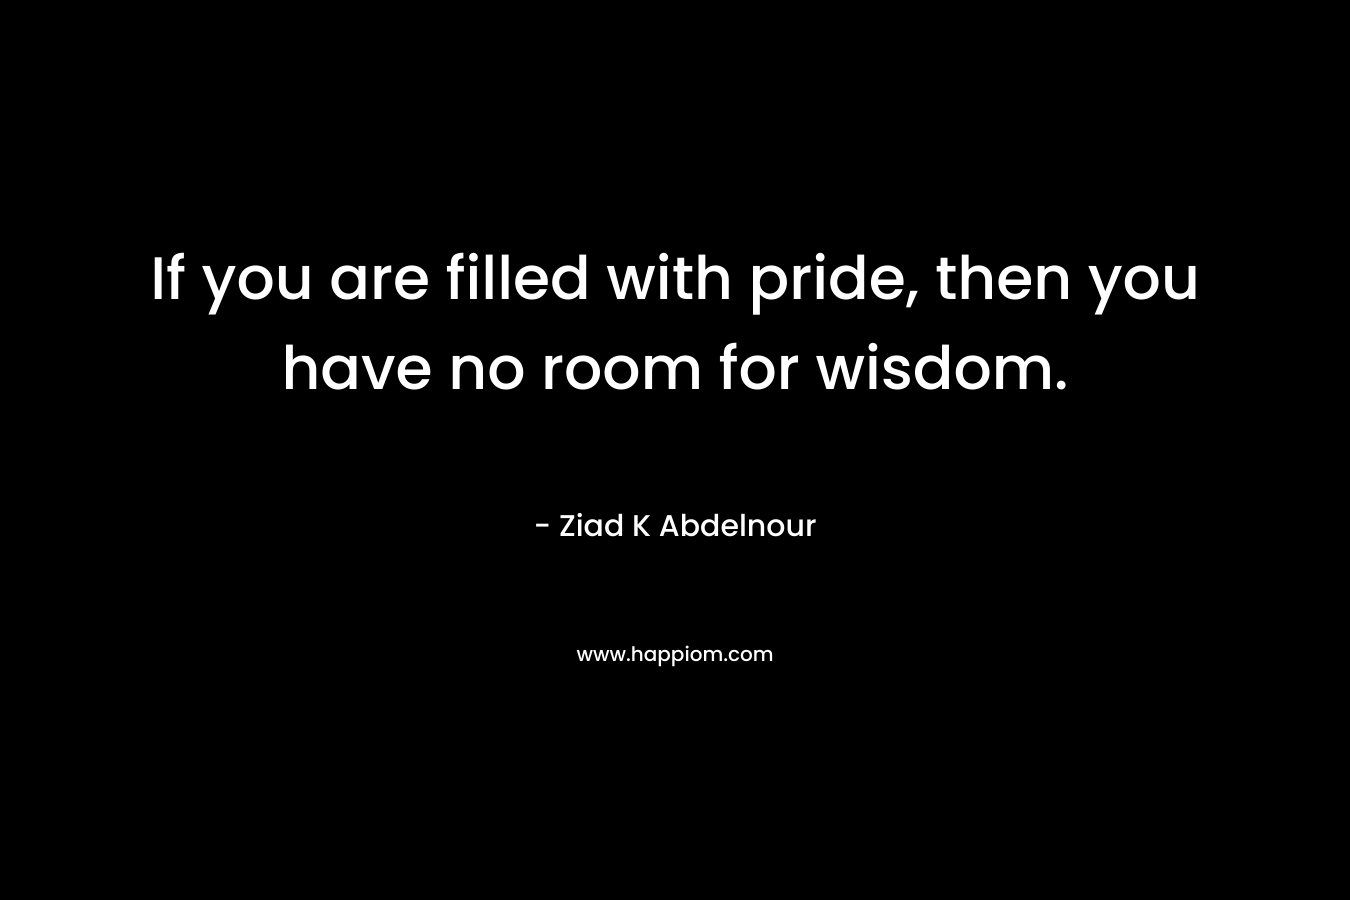 If you are filled with pride, then you have no room for wisdom.